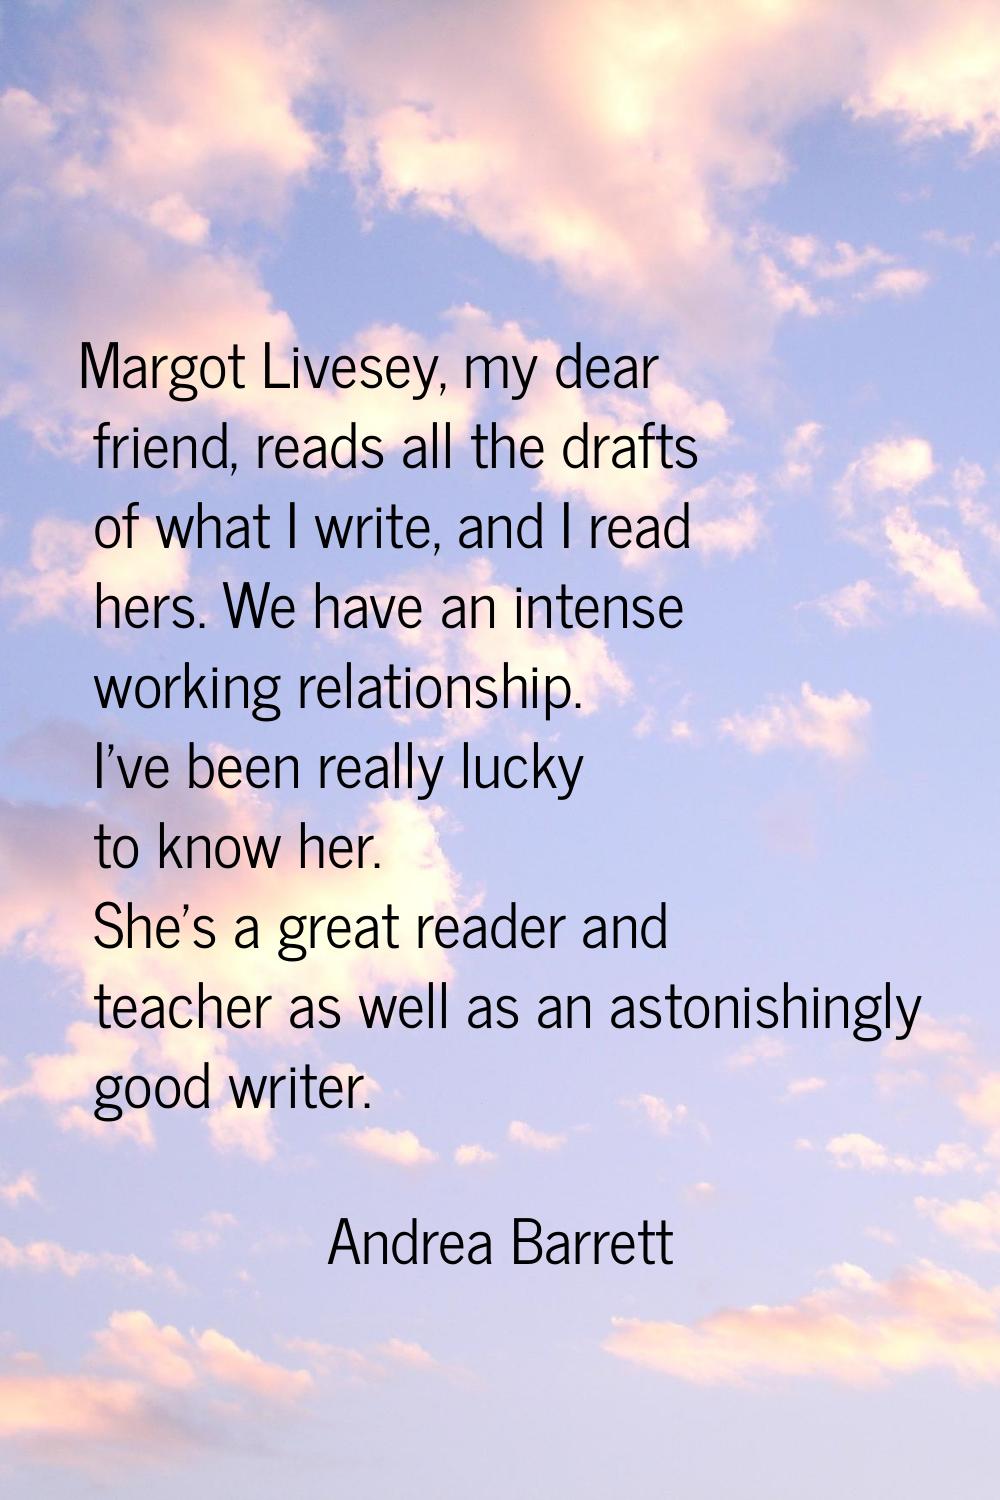 Margot Livesey, my dear friend, reads all the drafts of what I write, and I read hers. We have an i